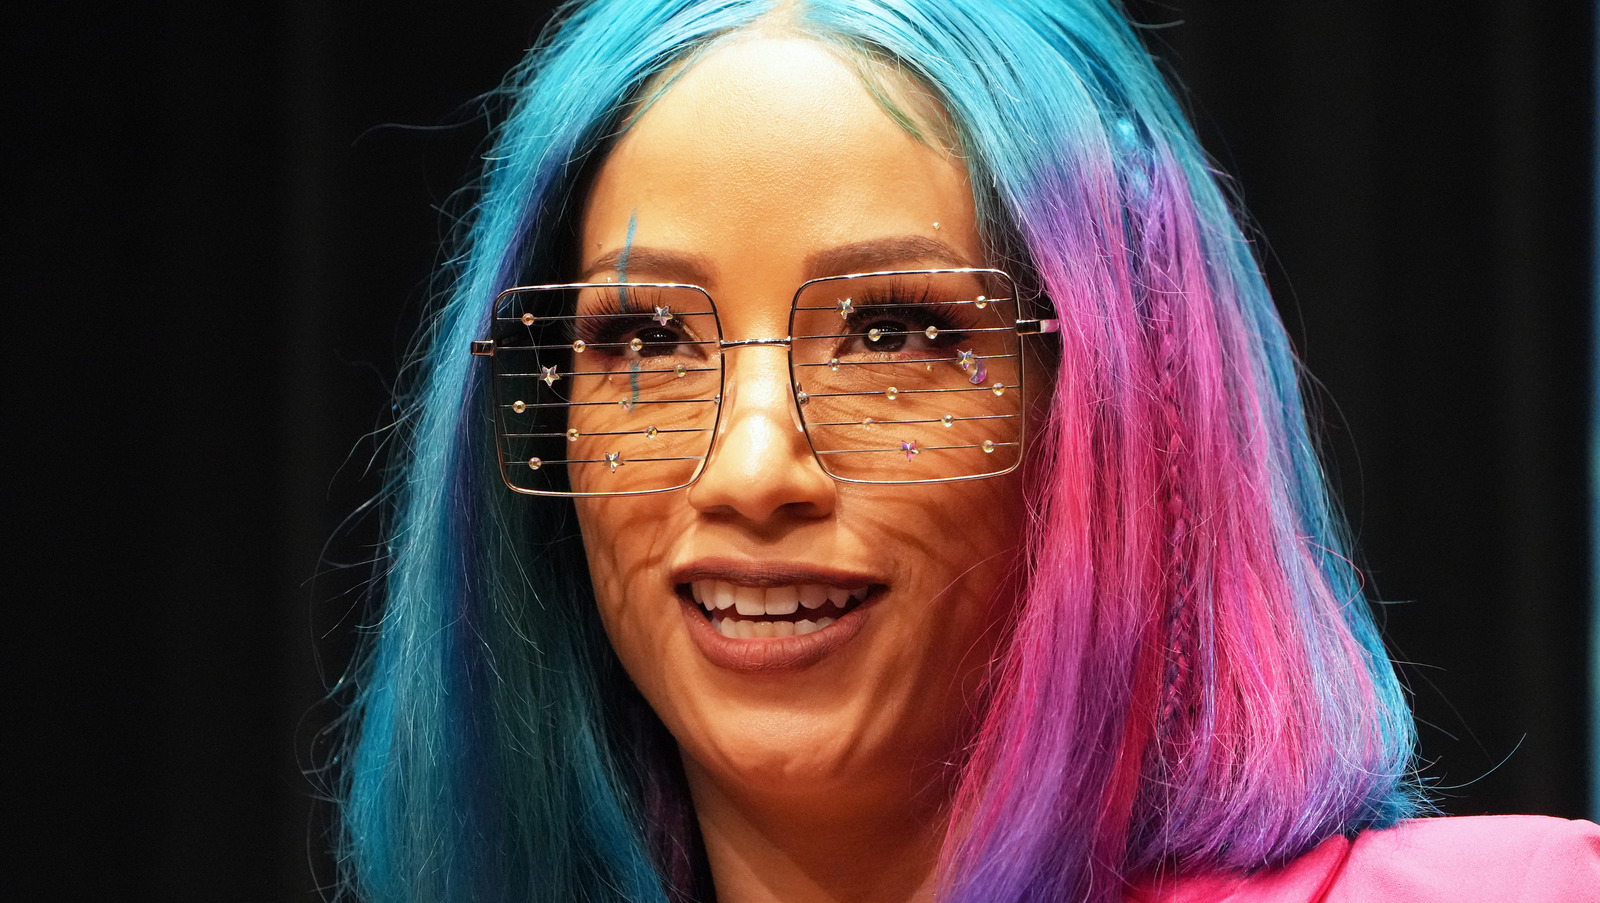 Mercedes Mone Expresses Desire To Move To Japan Full-Time As NJPW Contract Winds Down